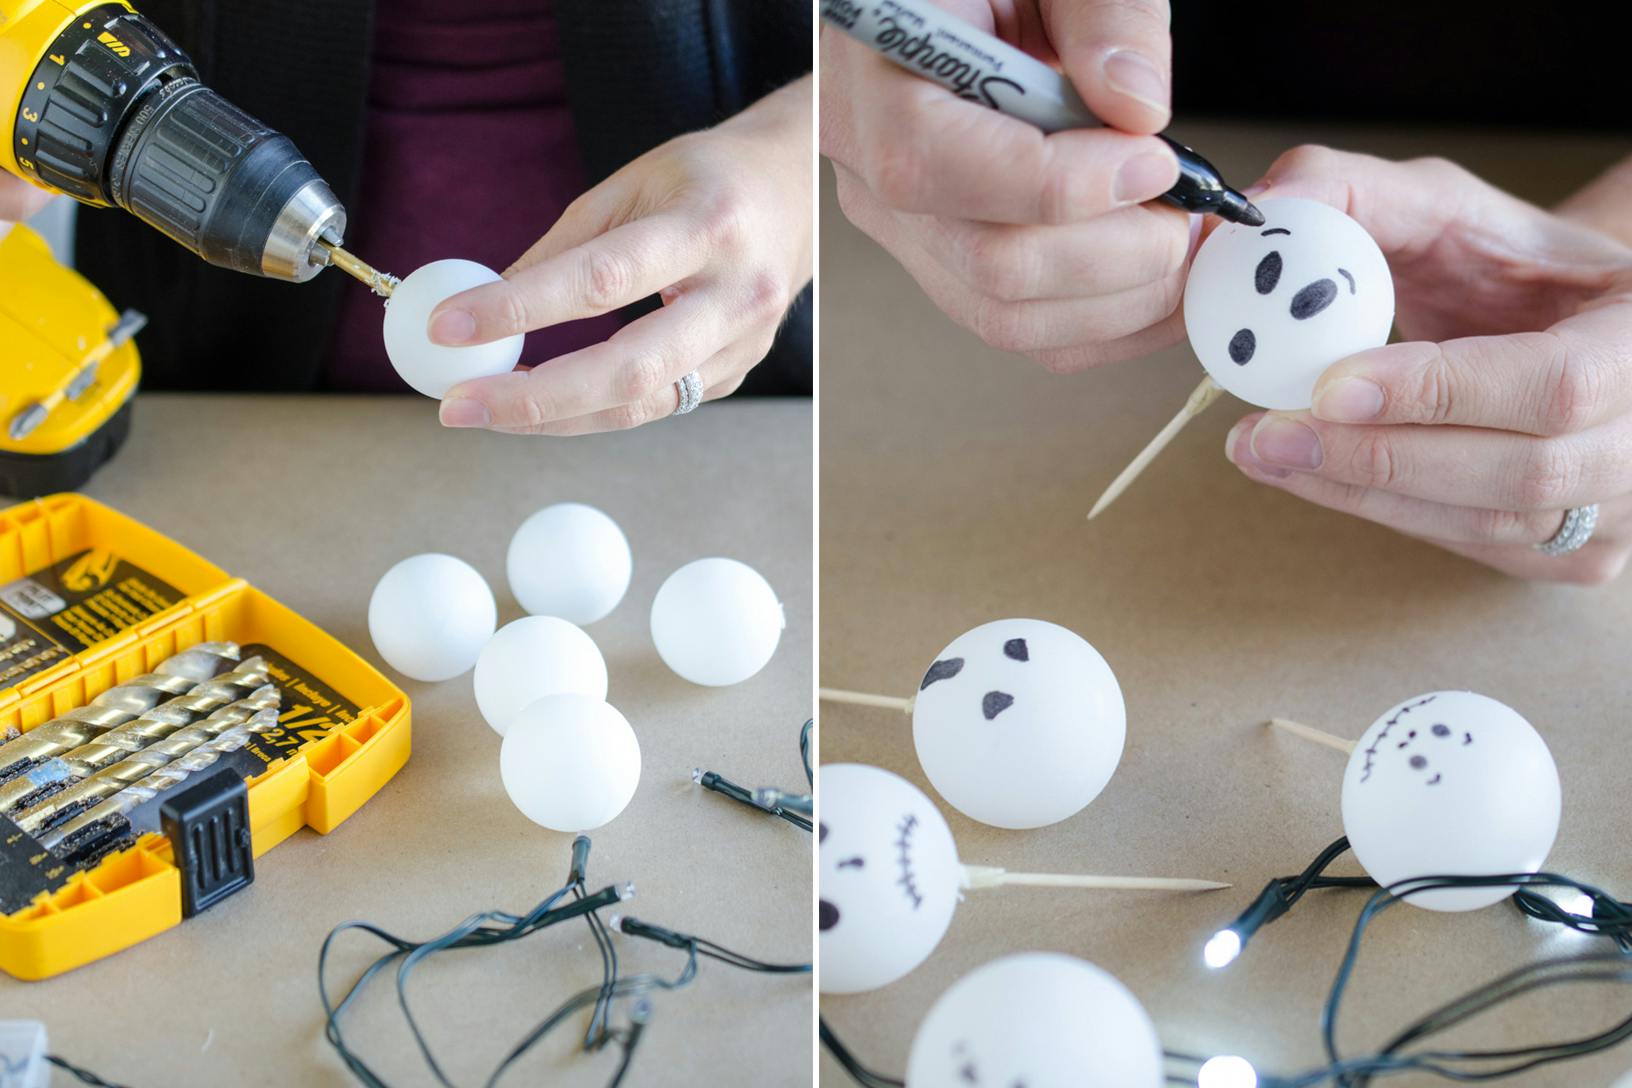 someone using a drill to stick holes in a ping pong ball, putting toothpicks in them and drawing faces on them with sharpie